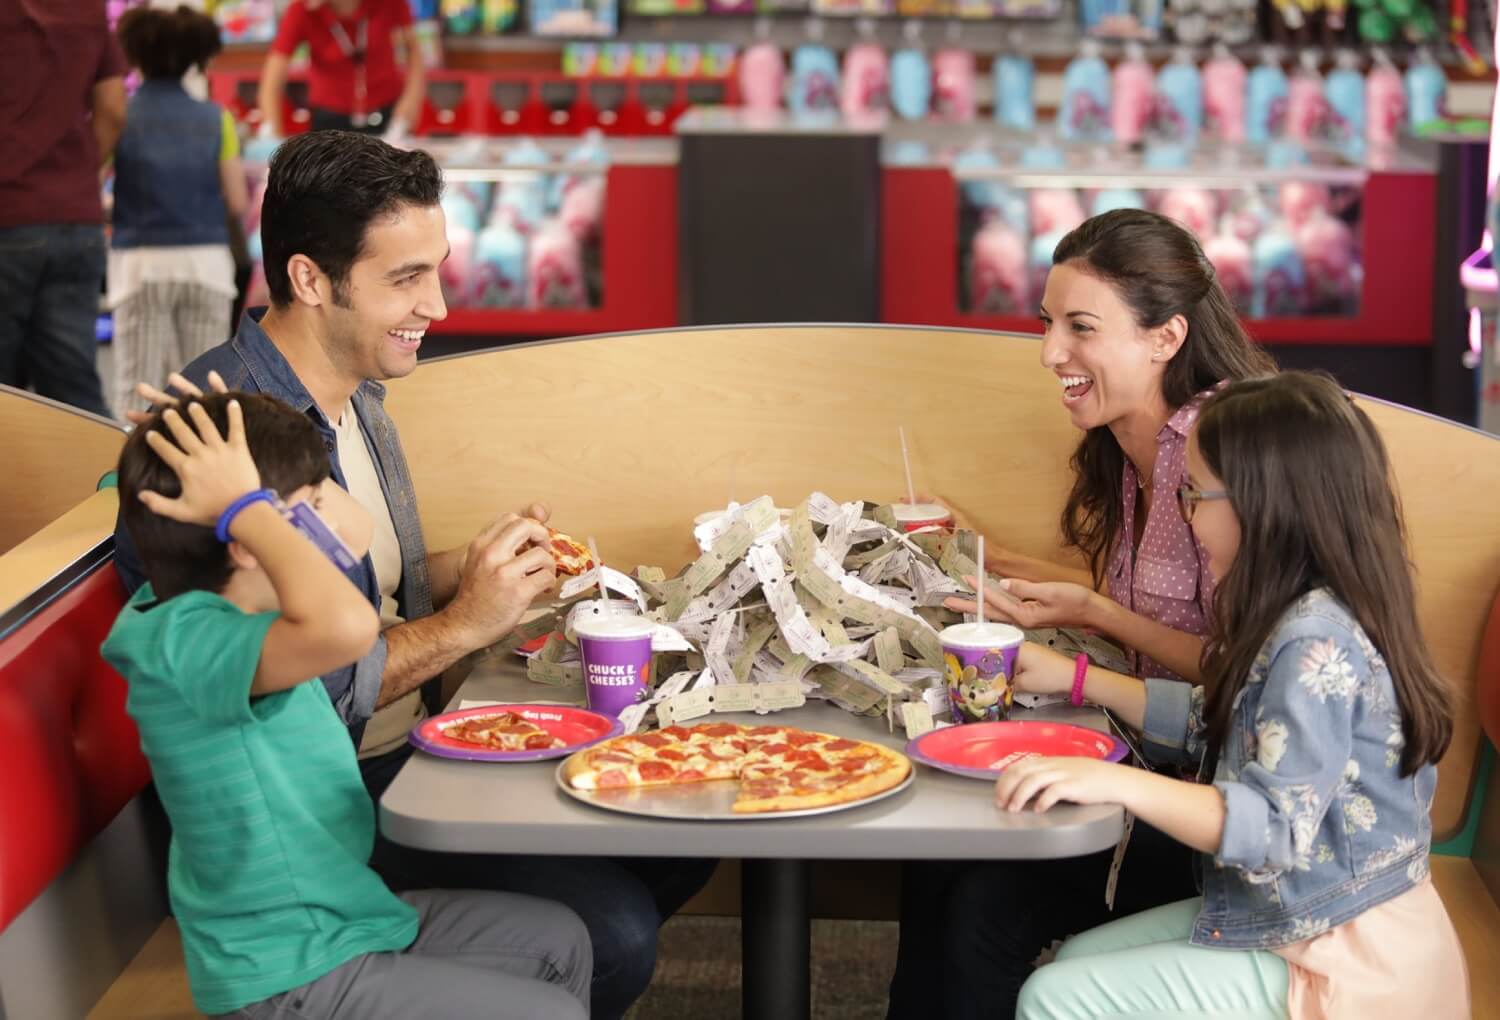 Family eating dinner with pizza and tickets on table